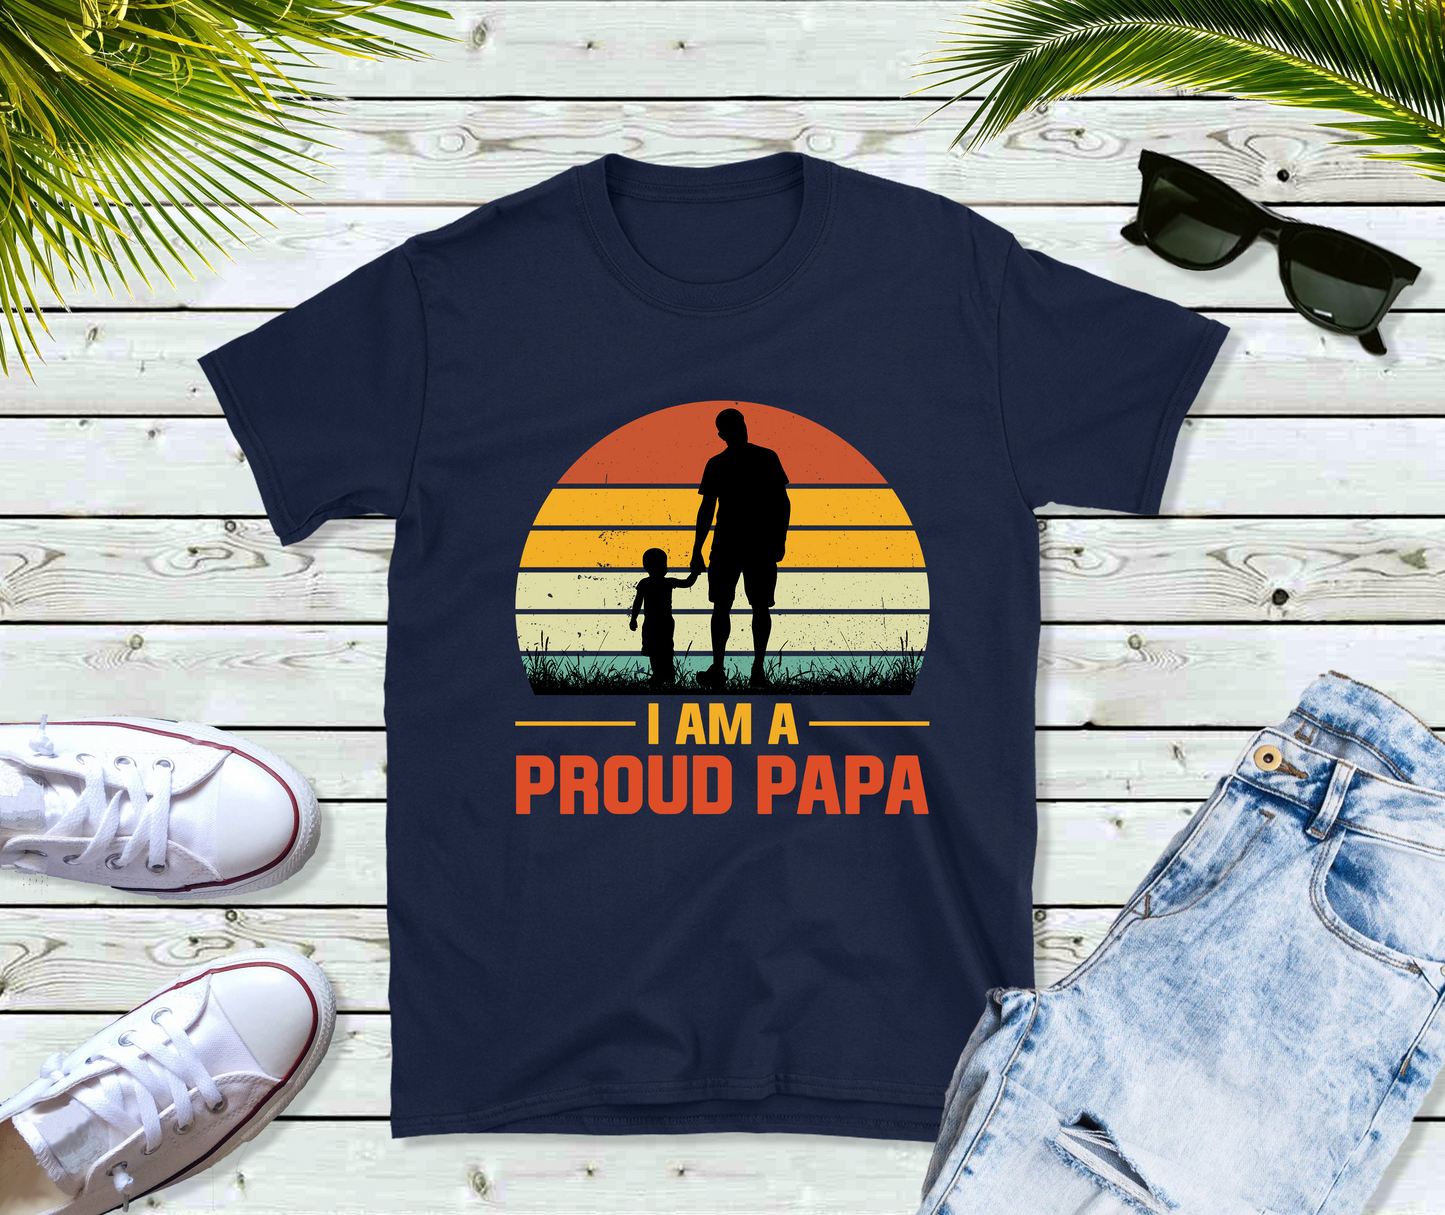 I am a Proud Papa T-Shirt, Fathers Day gift, Gift for Dad, Gift for Papa, Gift for Grandpa, Shirt for Papa, Grandparents Day Gift